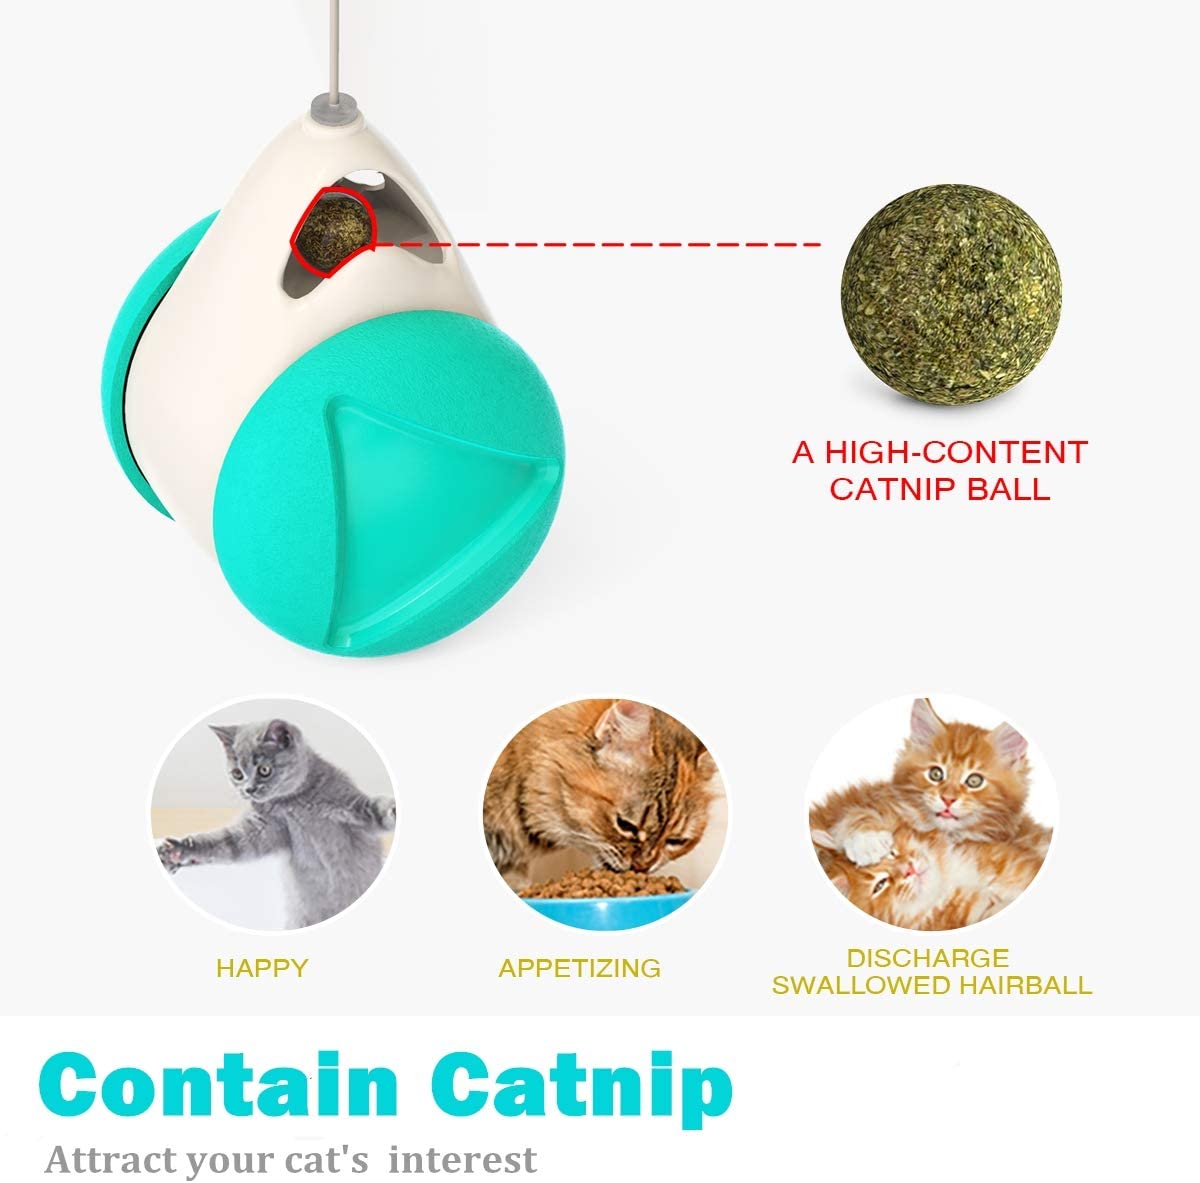 Self-Balance Tumbler toy for Kittens and Cats High Quality pets-park-pk